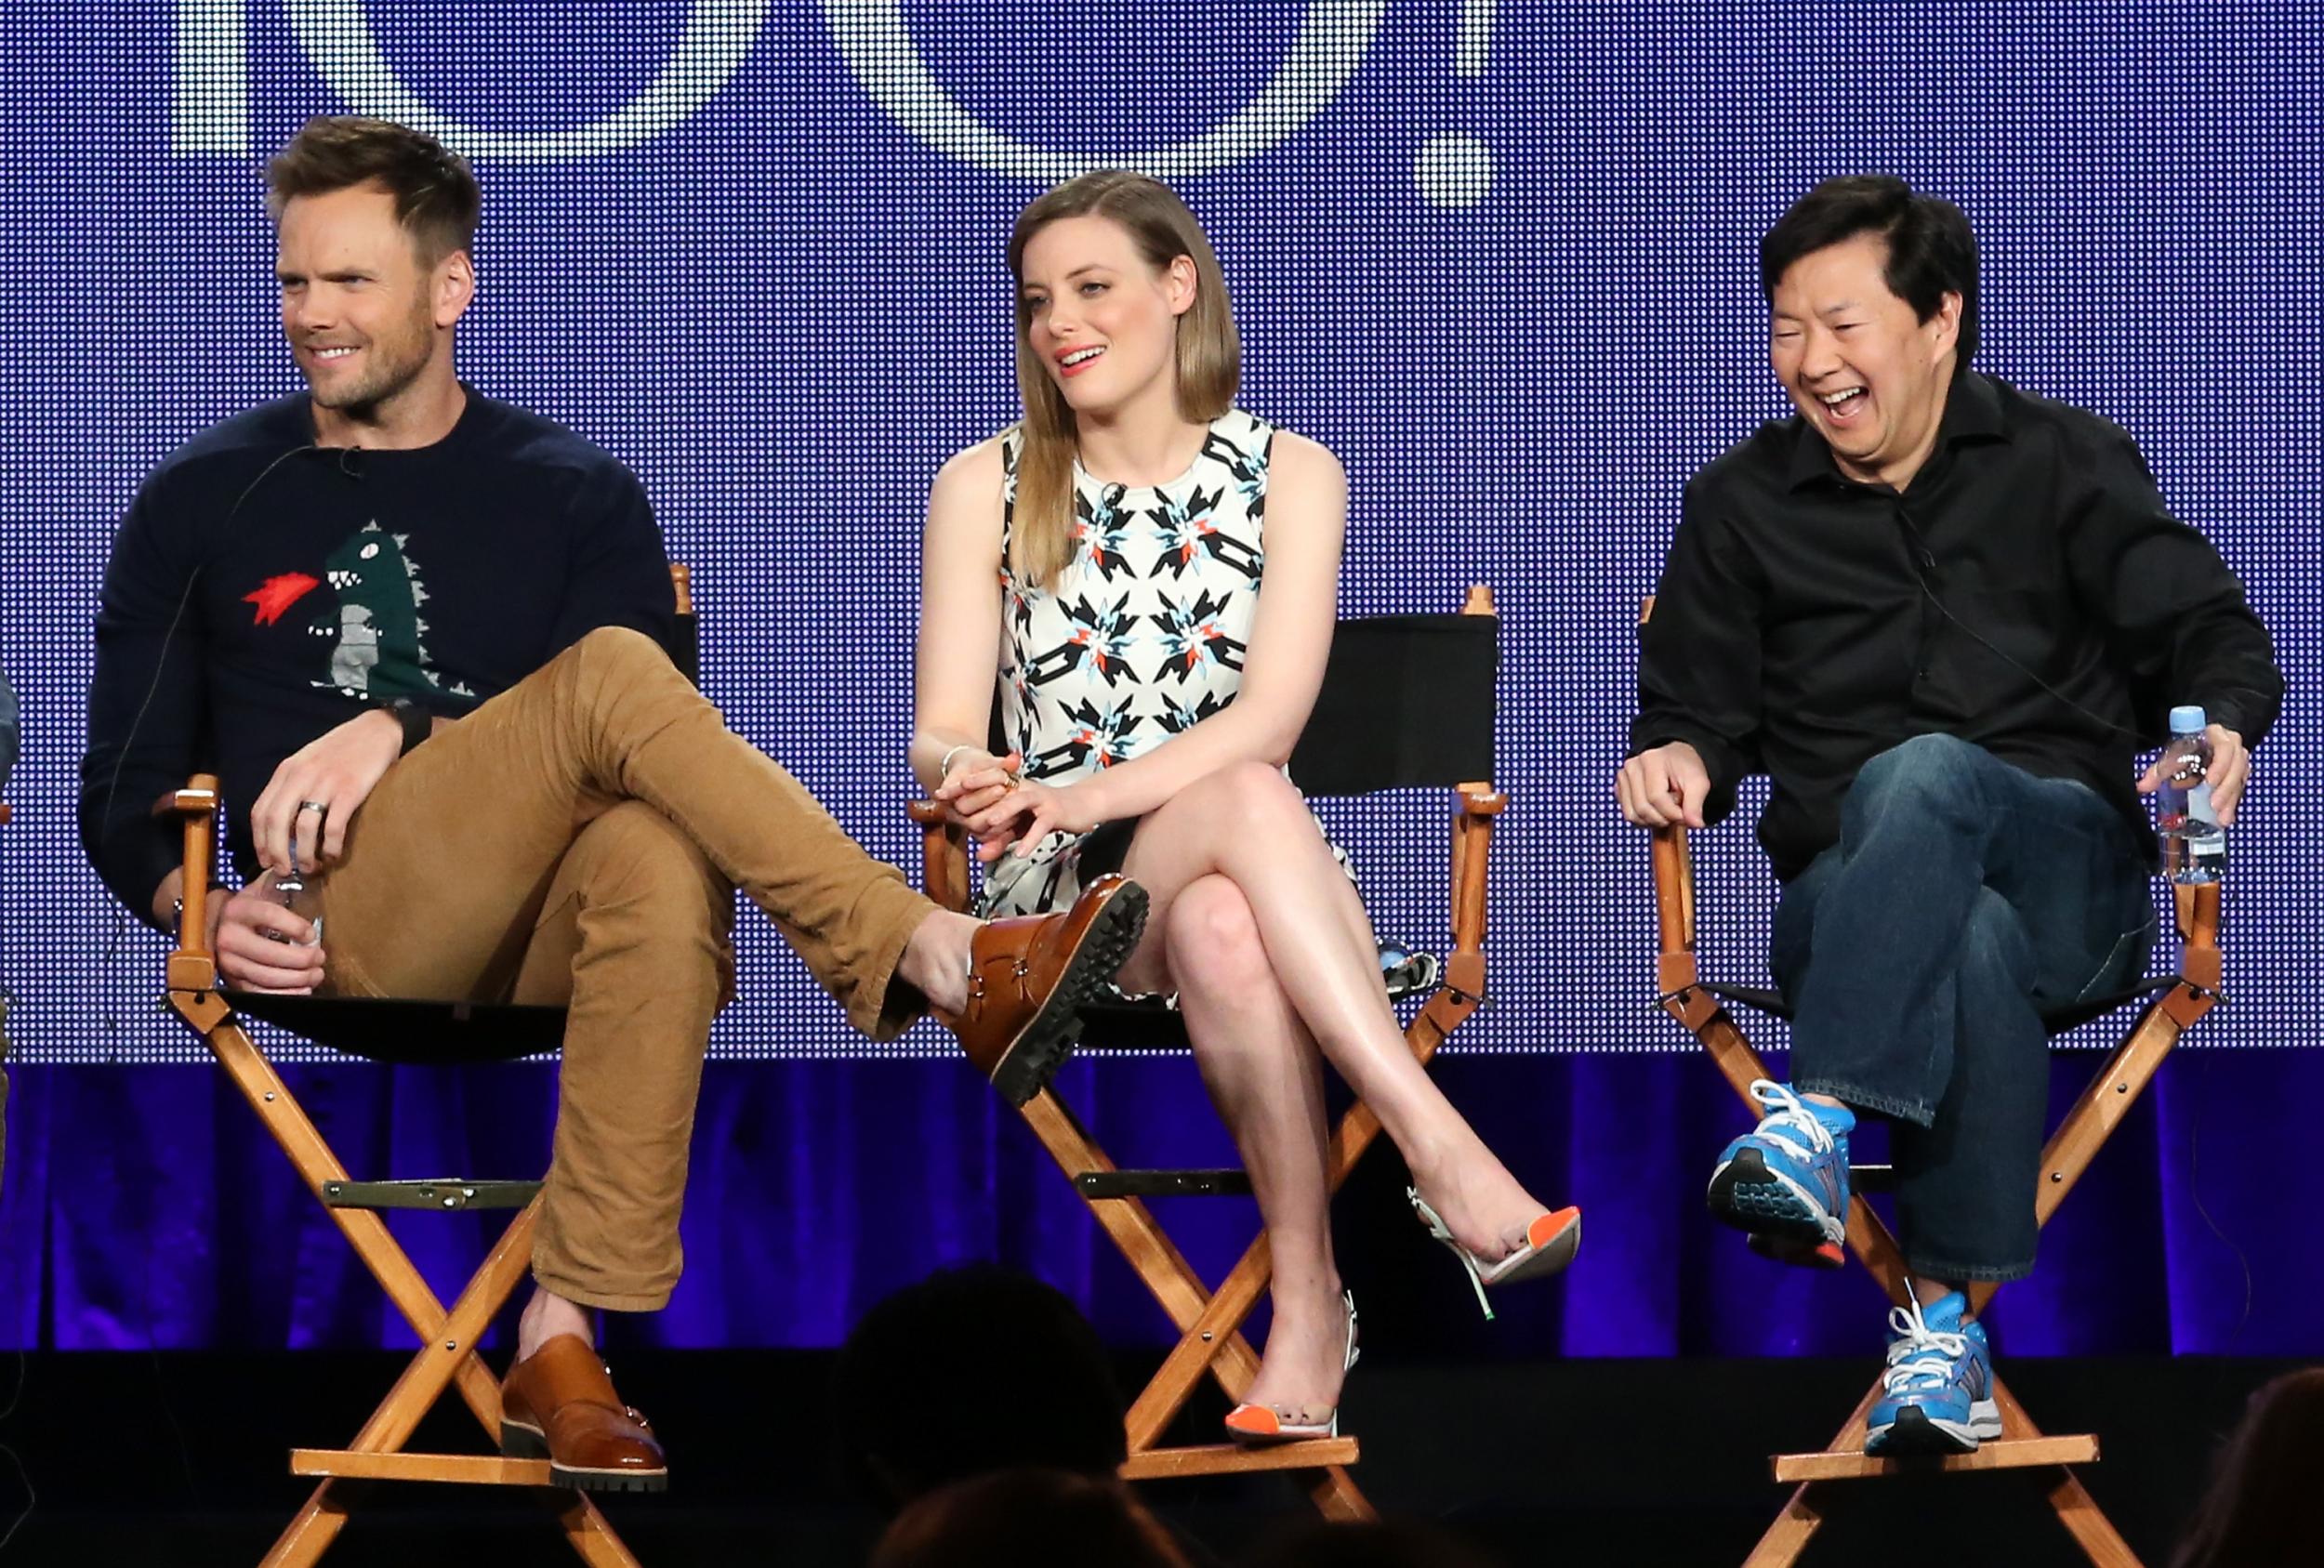 Joel McHale, Gillian Jacobs and Ken Jeong speak during the ‘Community’ panel as part of the 2015 Winter Television Critics Association Press Tour